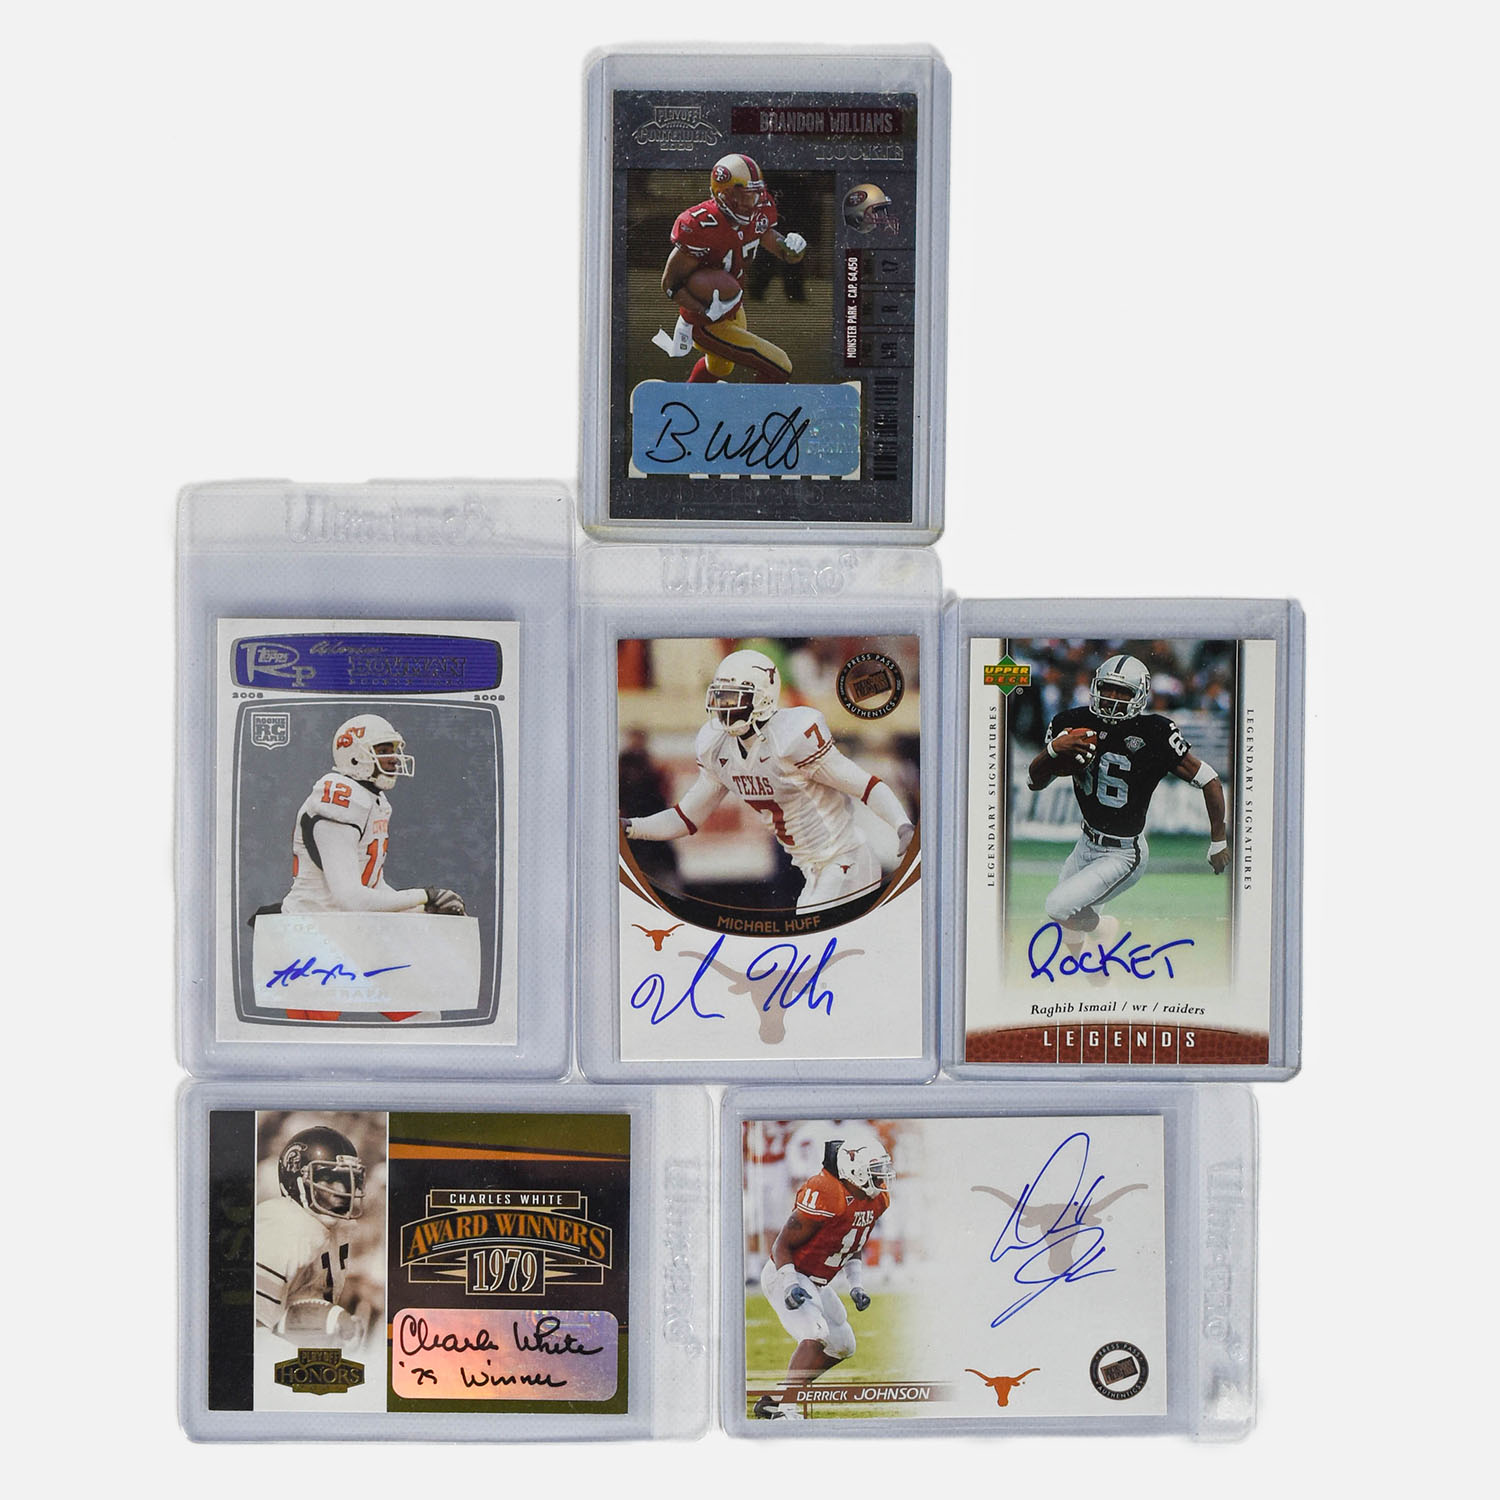 6 NFL CFB Signed Football Cards with Extra 775 Plus Mint Cards